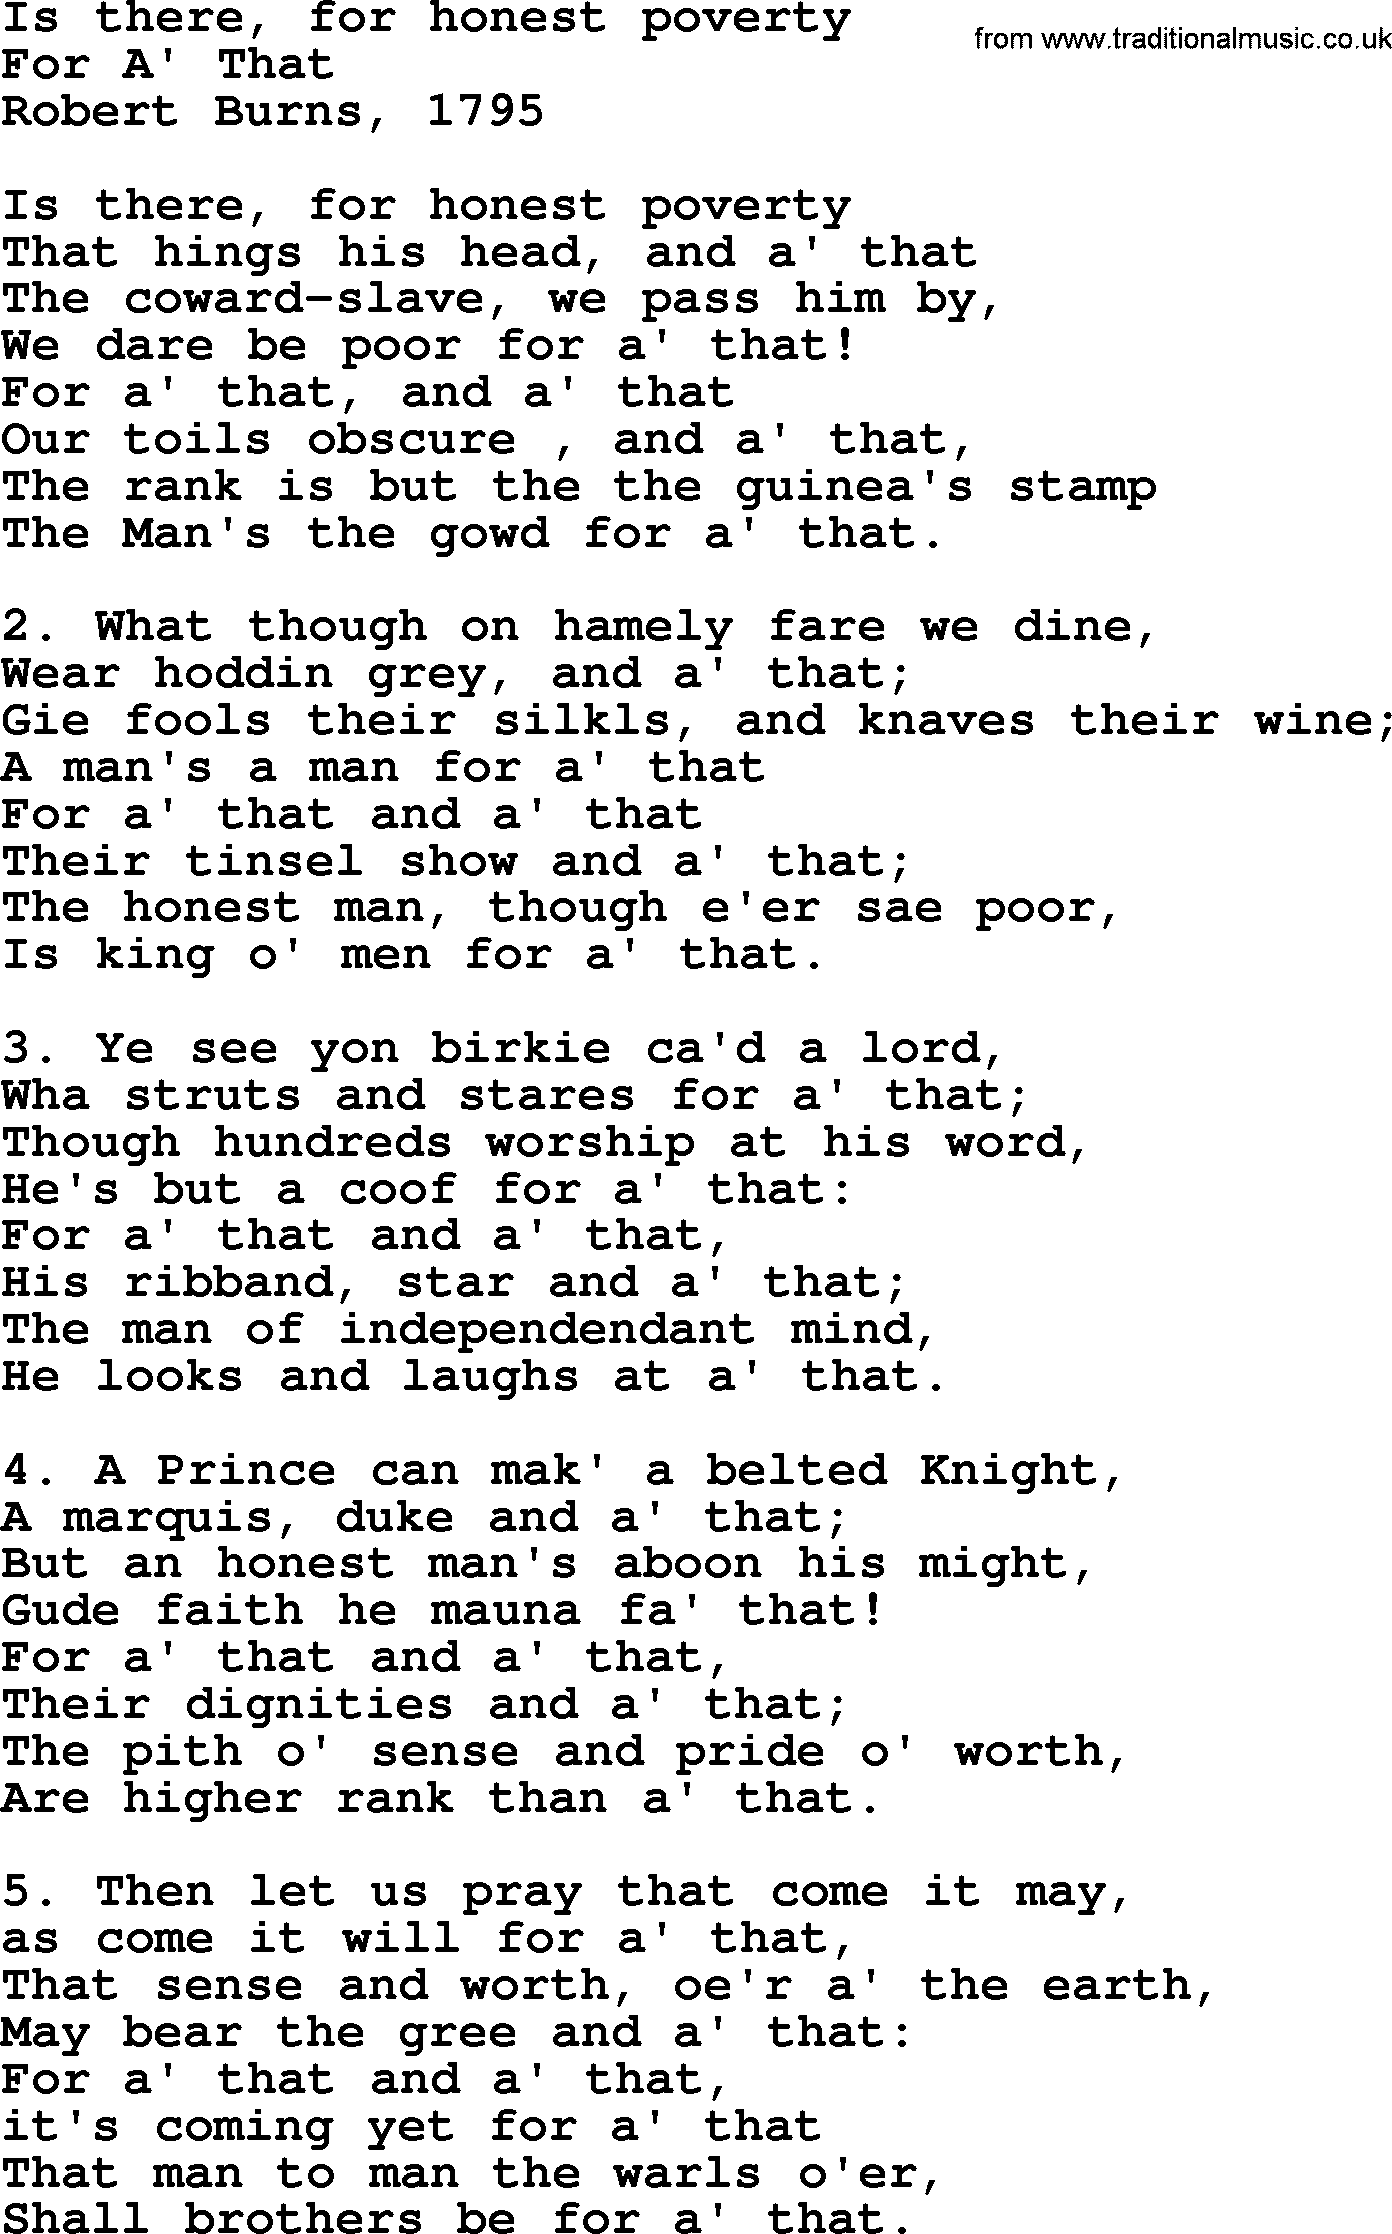 Robert Burns Songs & Lyrics: Is There, For Honest Poverty